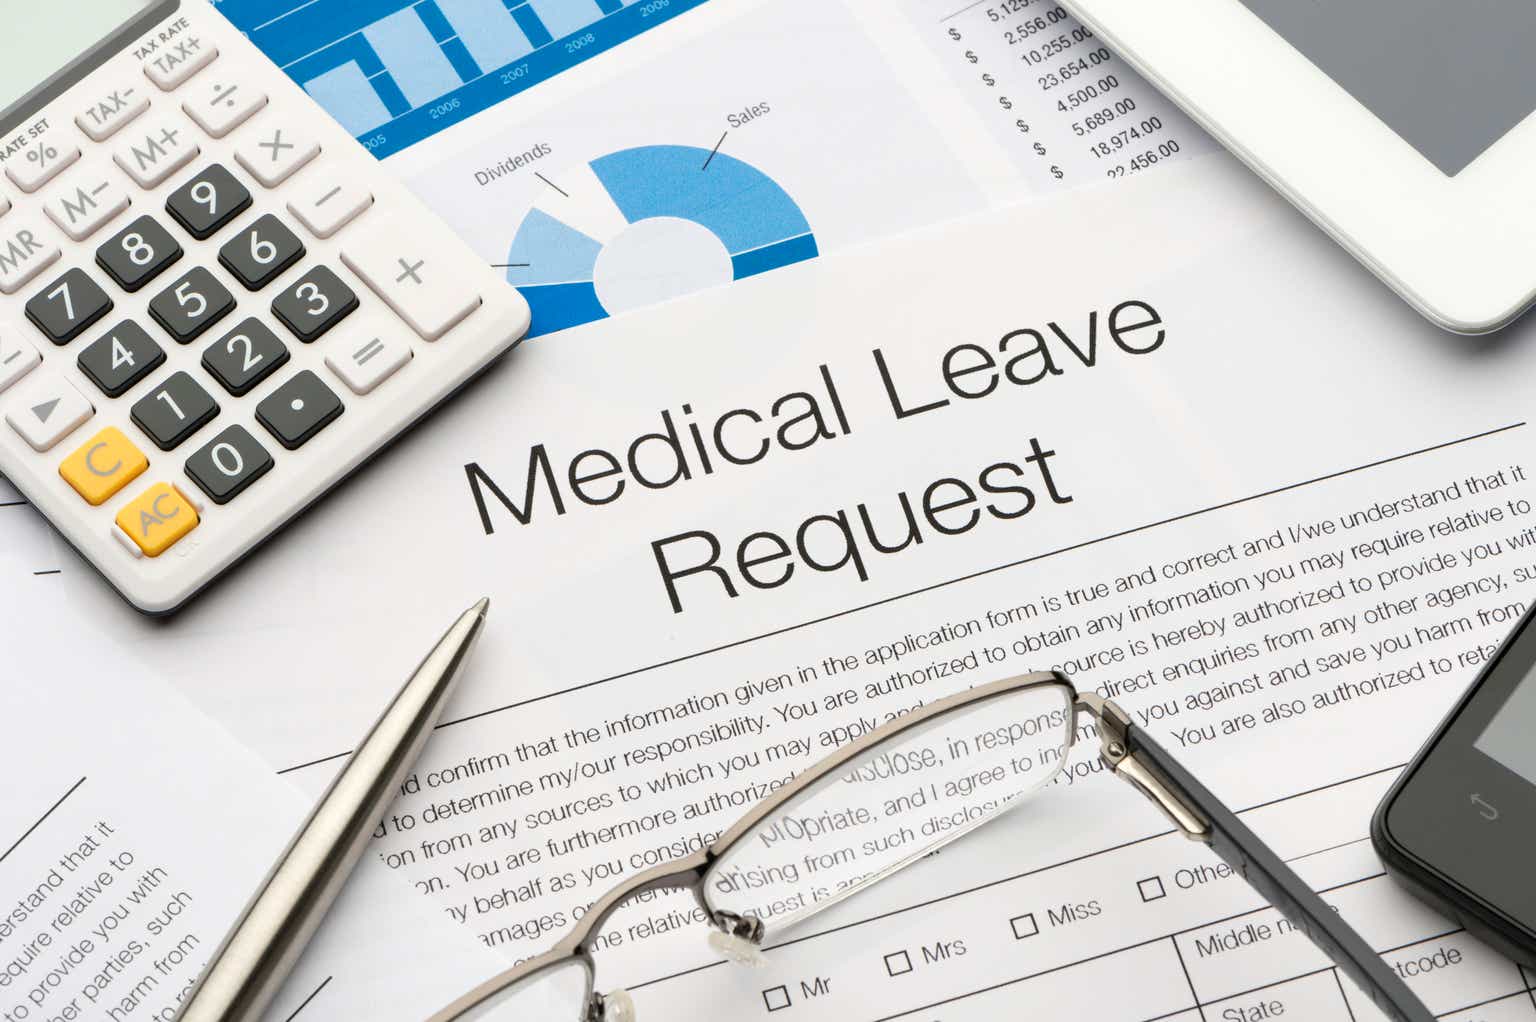 Request 30. Medical leave.